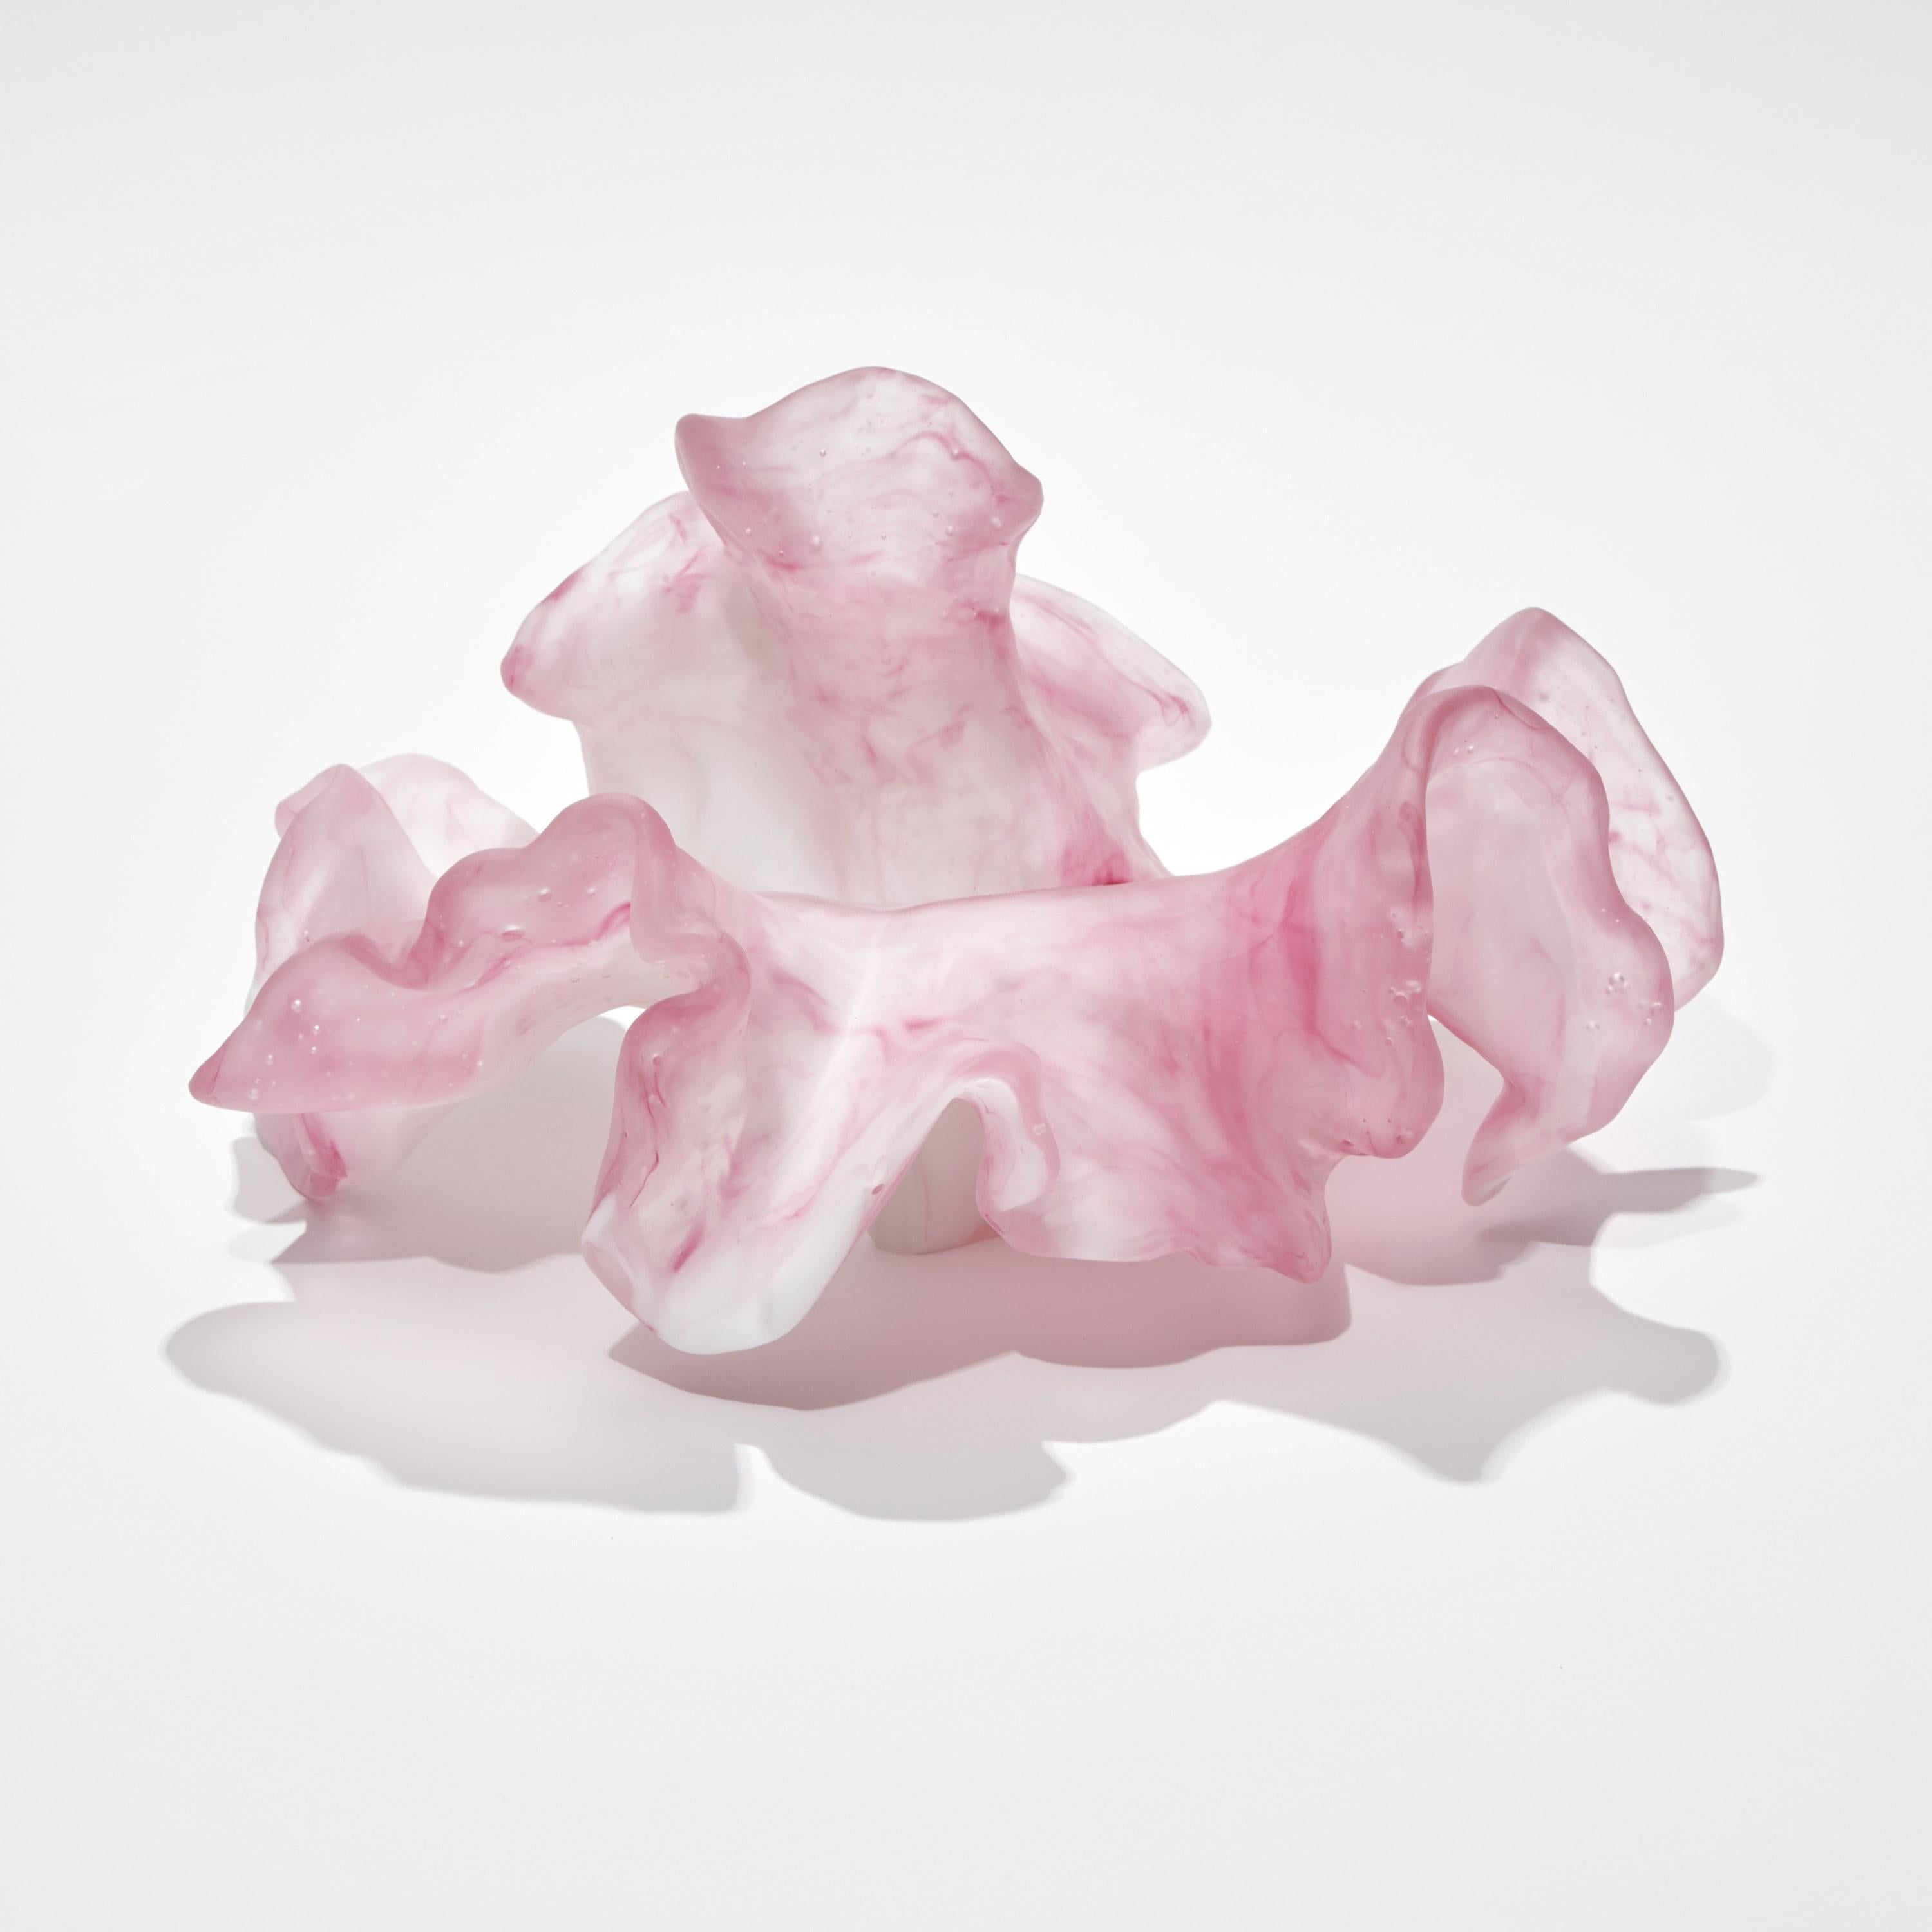 'Unfolded Change' is a unique cast glass sculpture by the Danish artist, Monette Larsen.

Larsen has always been fascinated by the concept of beauty within nature; what makes something beautiful and the characteristics that define it as such. Her